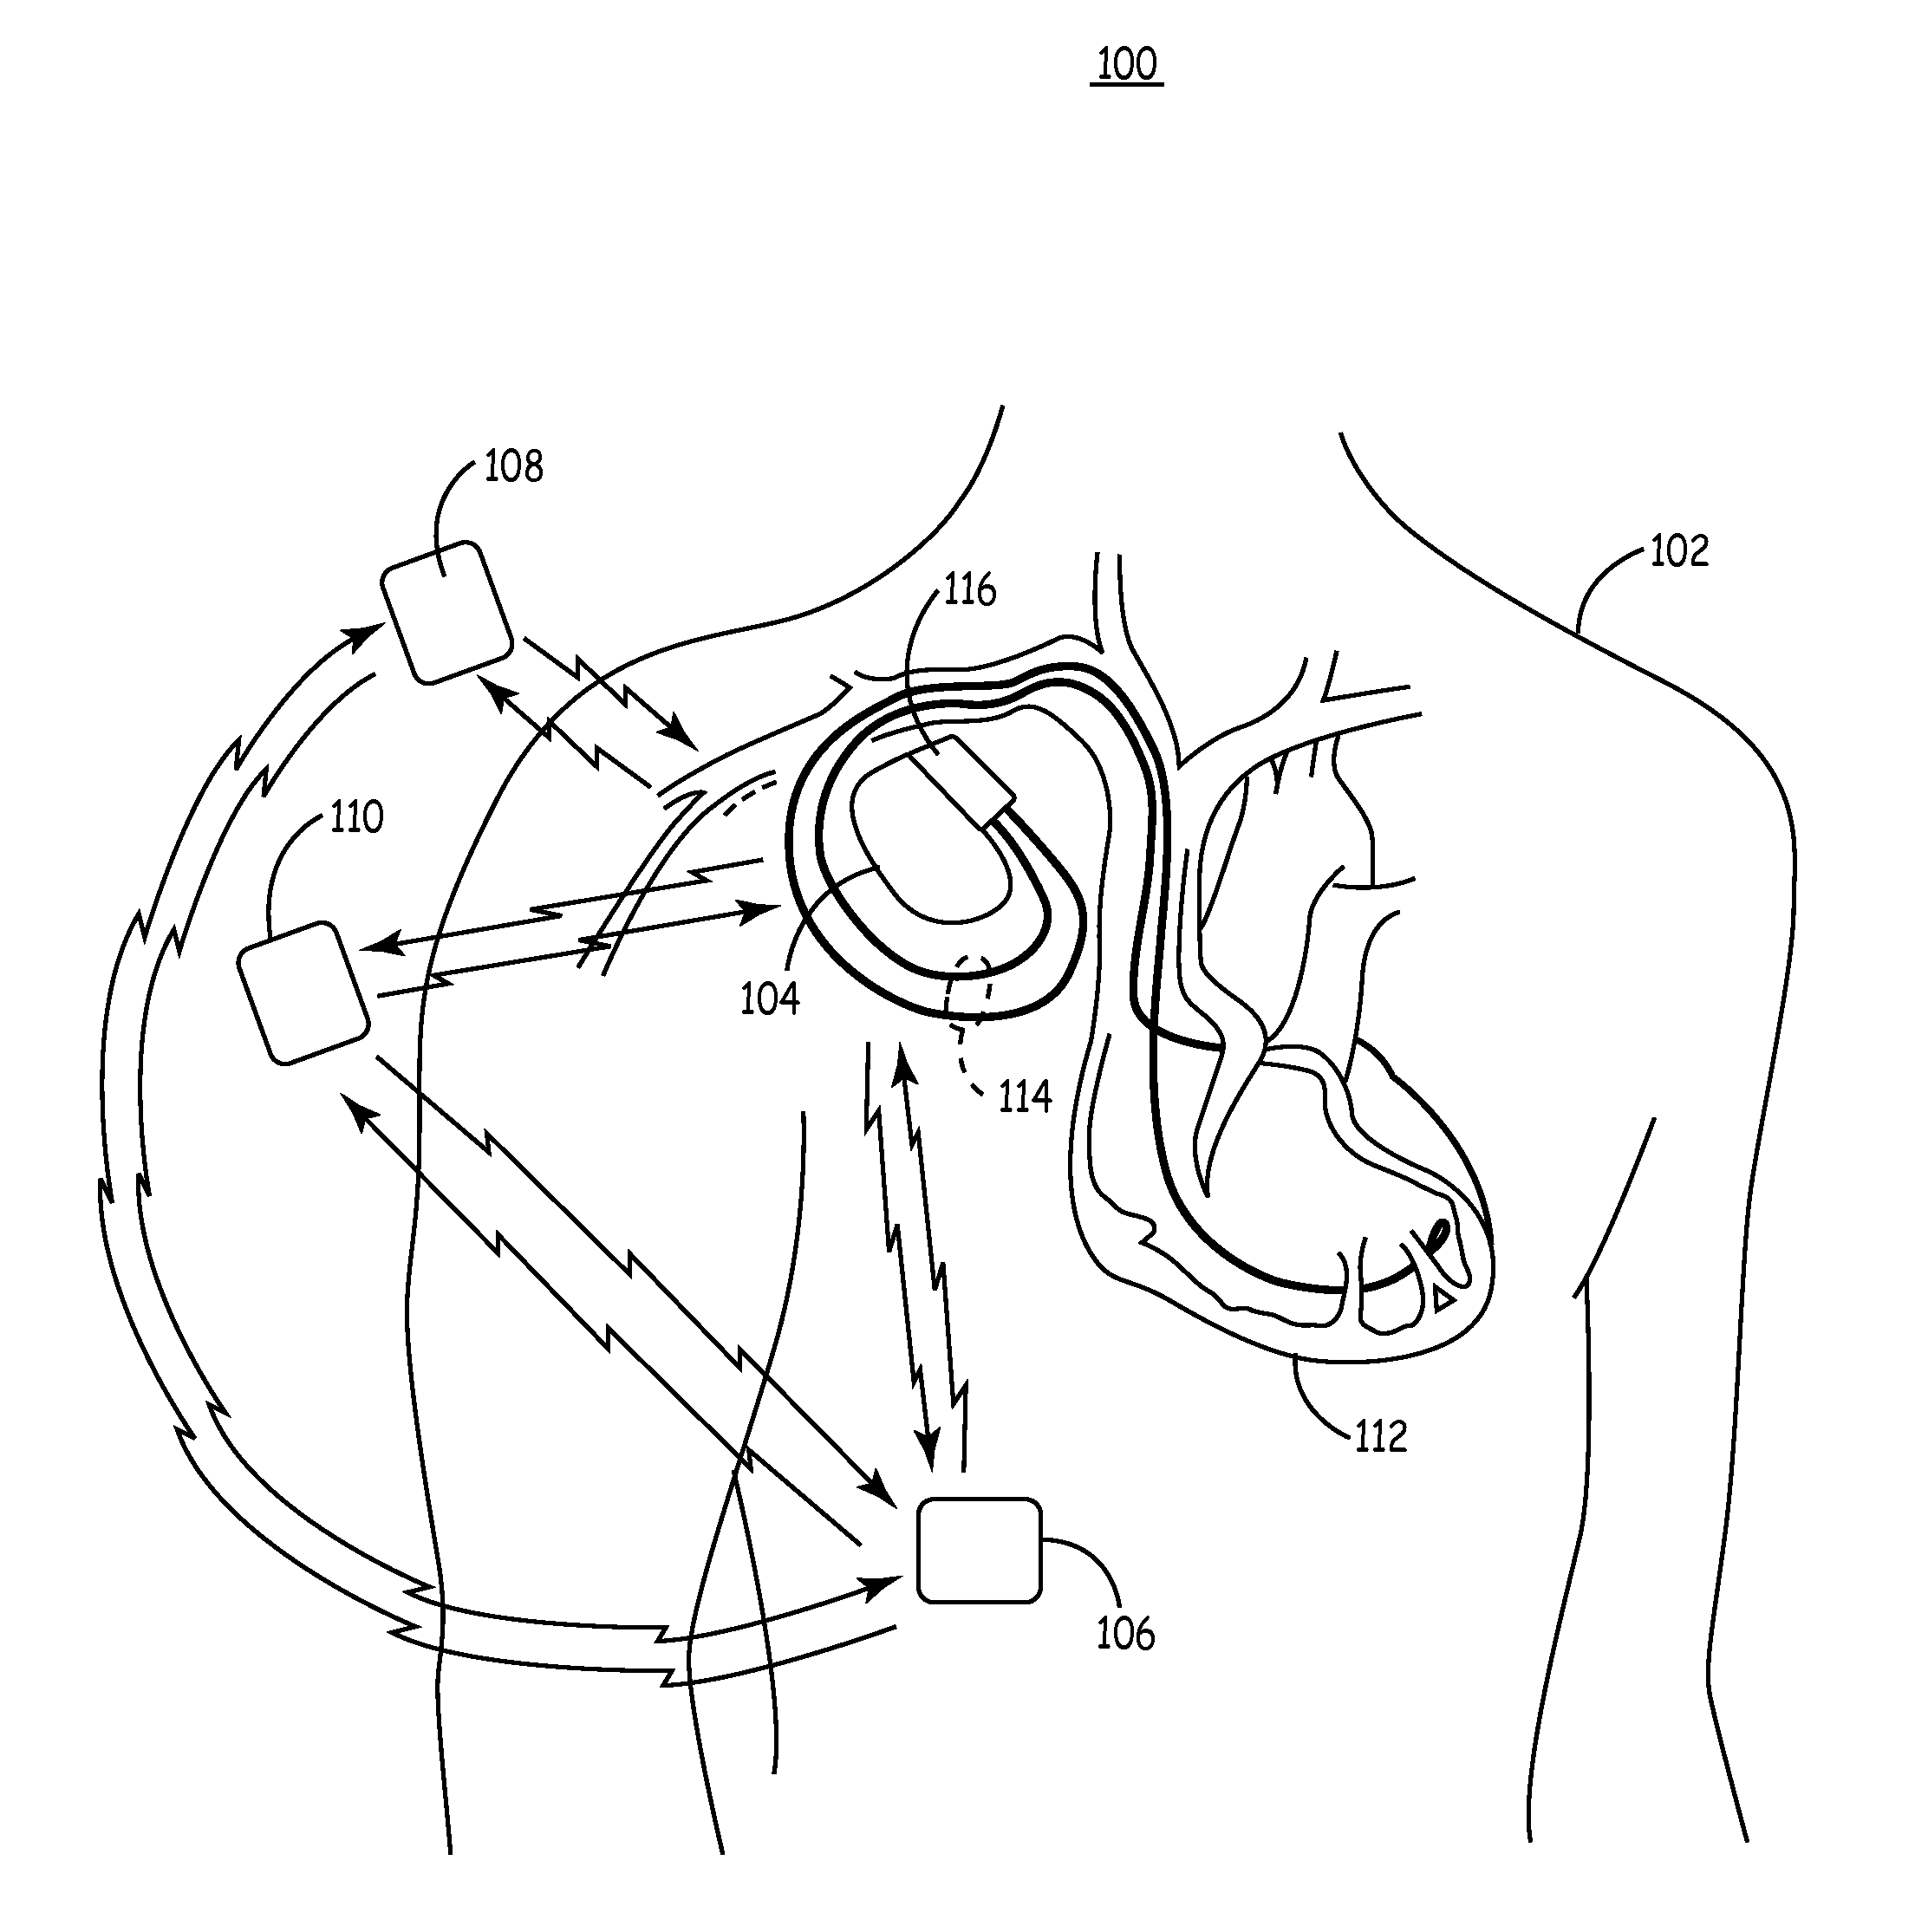 Variable Implantable Medical Device Power Characteristics Based Upon Implant Depth